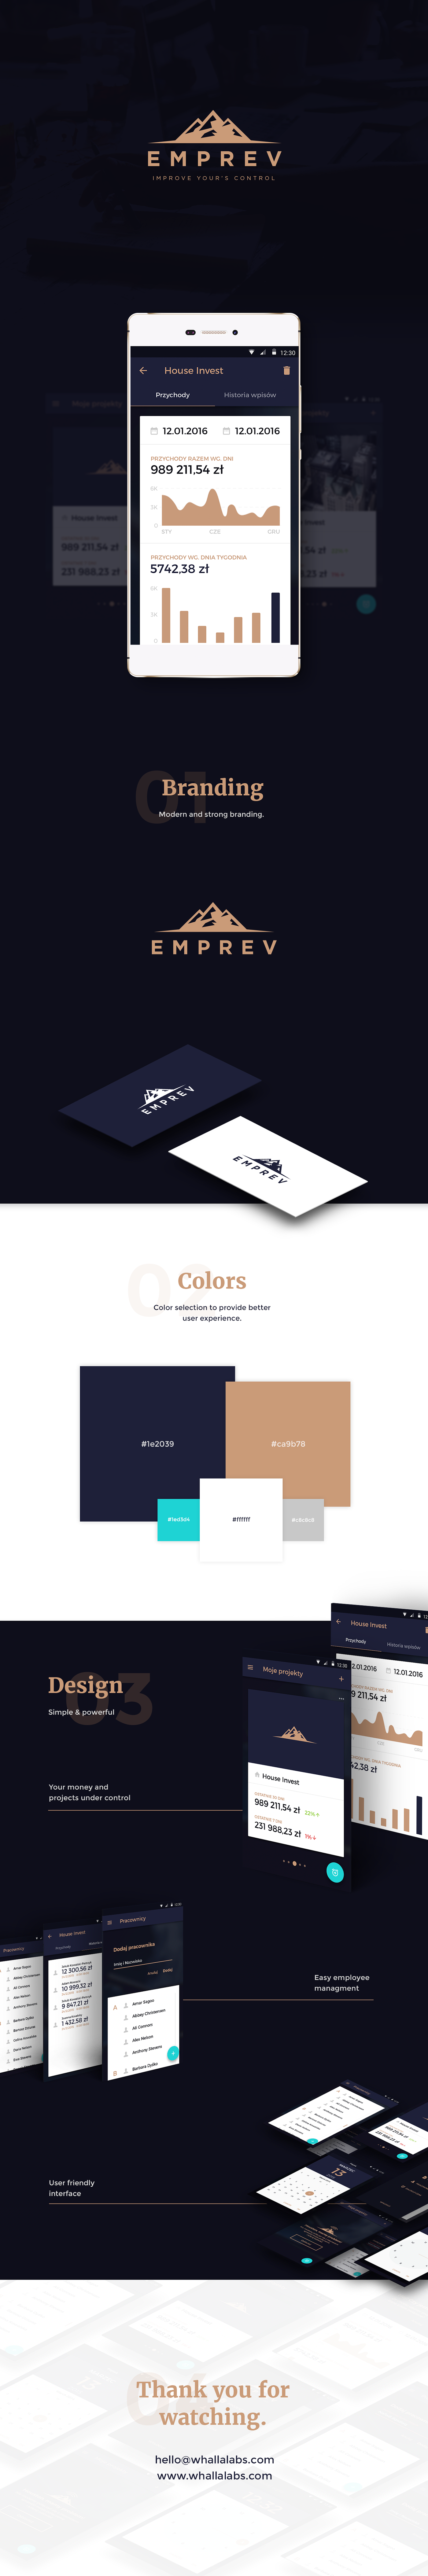 project managment ui design design UX user experience design color palette inspiration Android App app design Appdesign material design app development